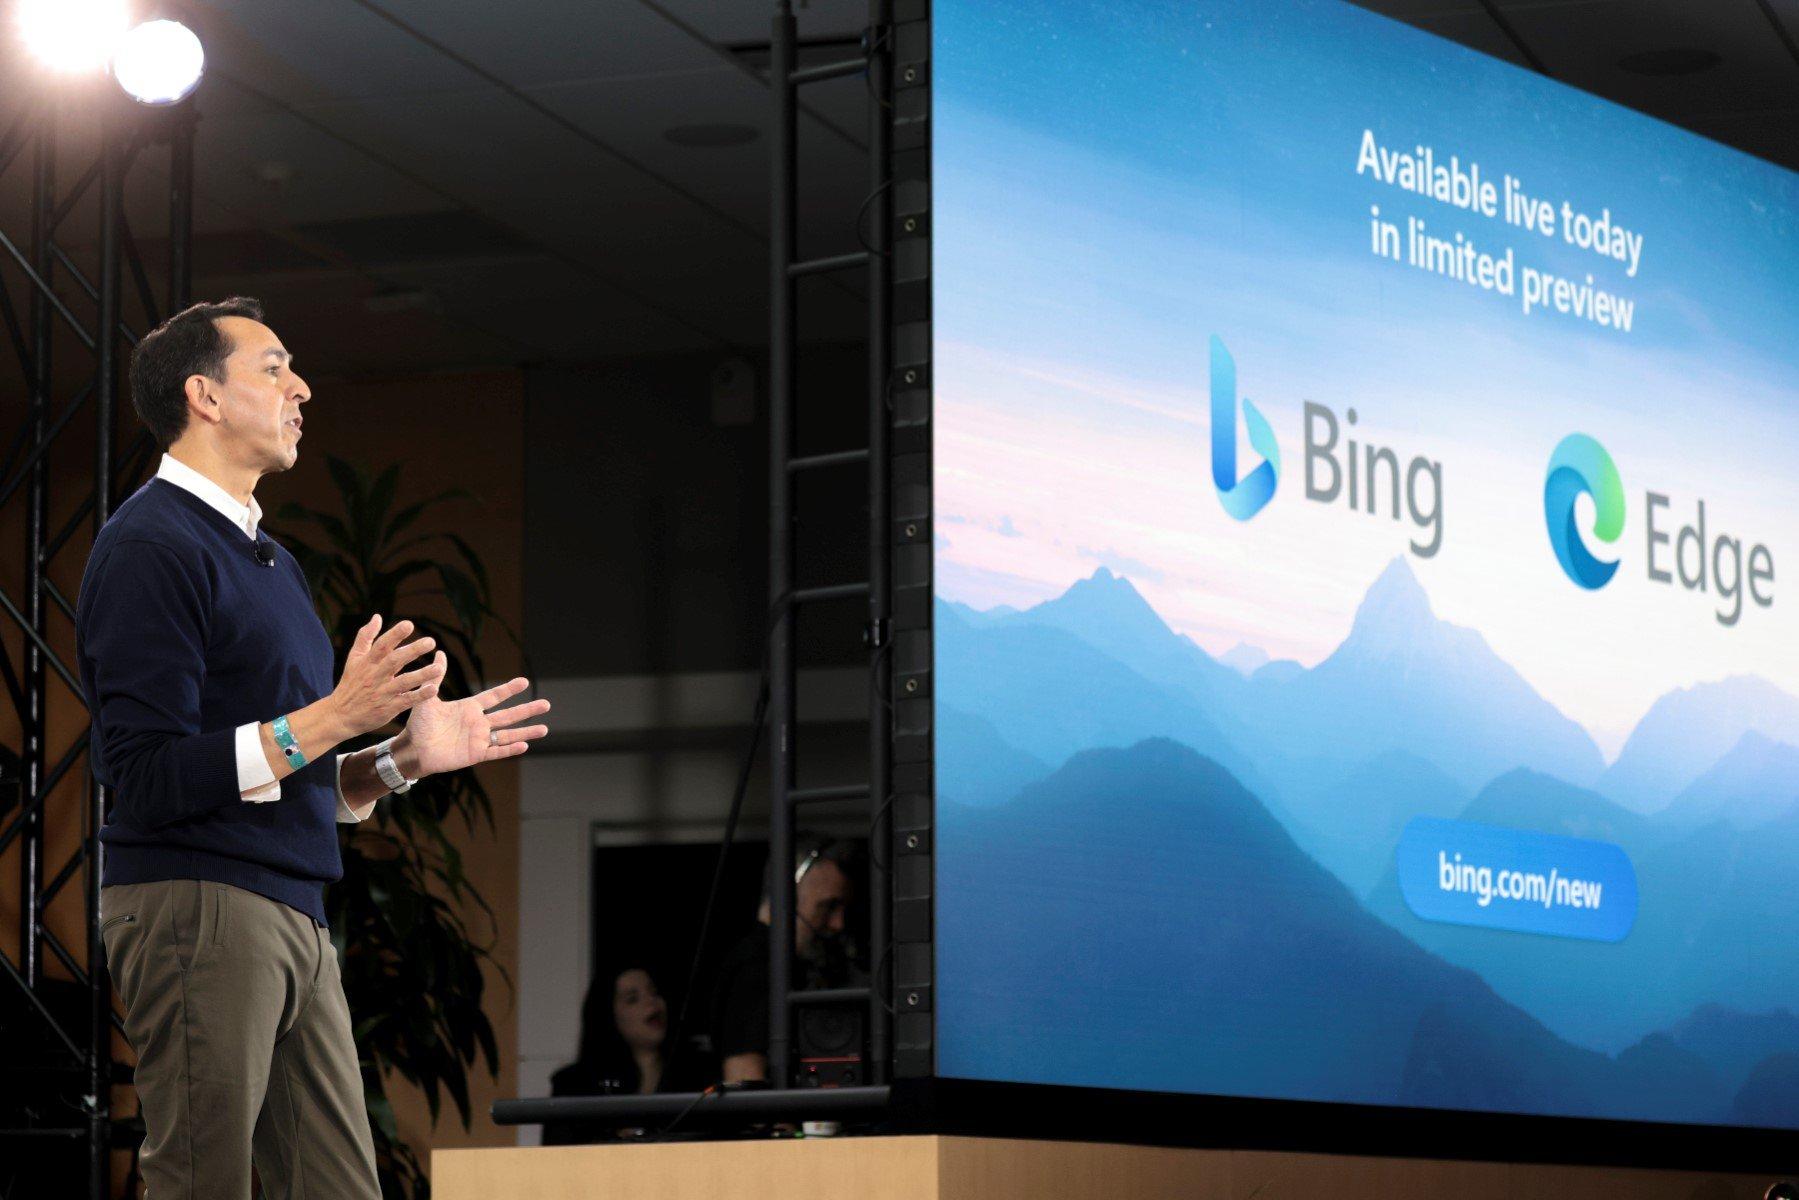 Yusuf Mehdi, Microsoft Corporate Vice President of Modern Life, Search, and Devices speaks during an event introducing a new AI-powered Microsoft Bing and Edge at Microsoft in Redmond, Washington on February 7, 2023. - Microsoft's long-struggling Bing search engine will integrate the powerful capabilities of language-based artificial intelligence, CEO Satya Nadella said, declaring what he called a new era for online search. (Photo by Jason Redmond / AFP)